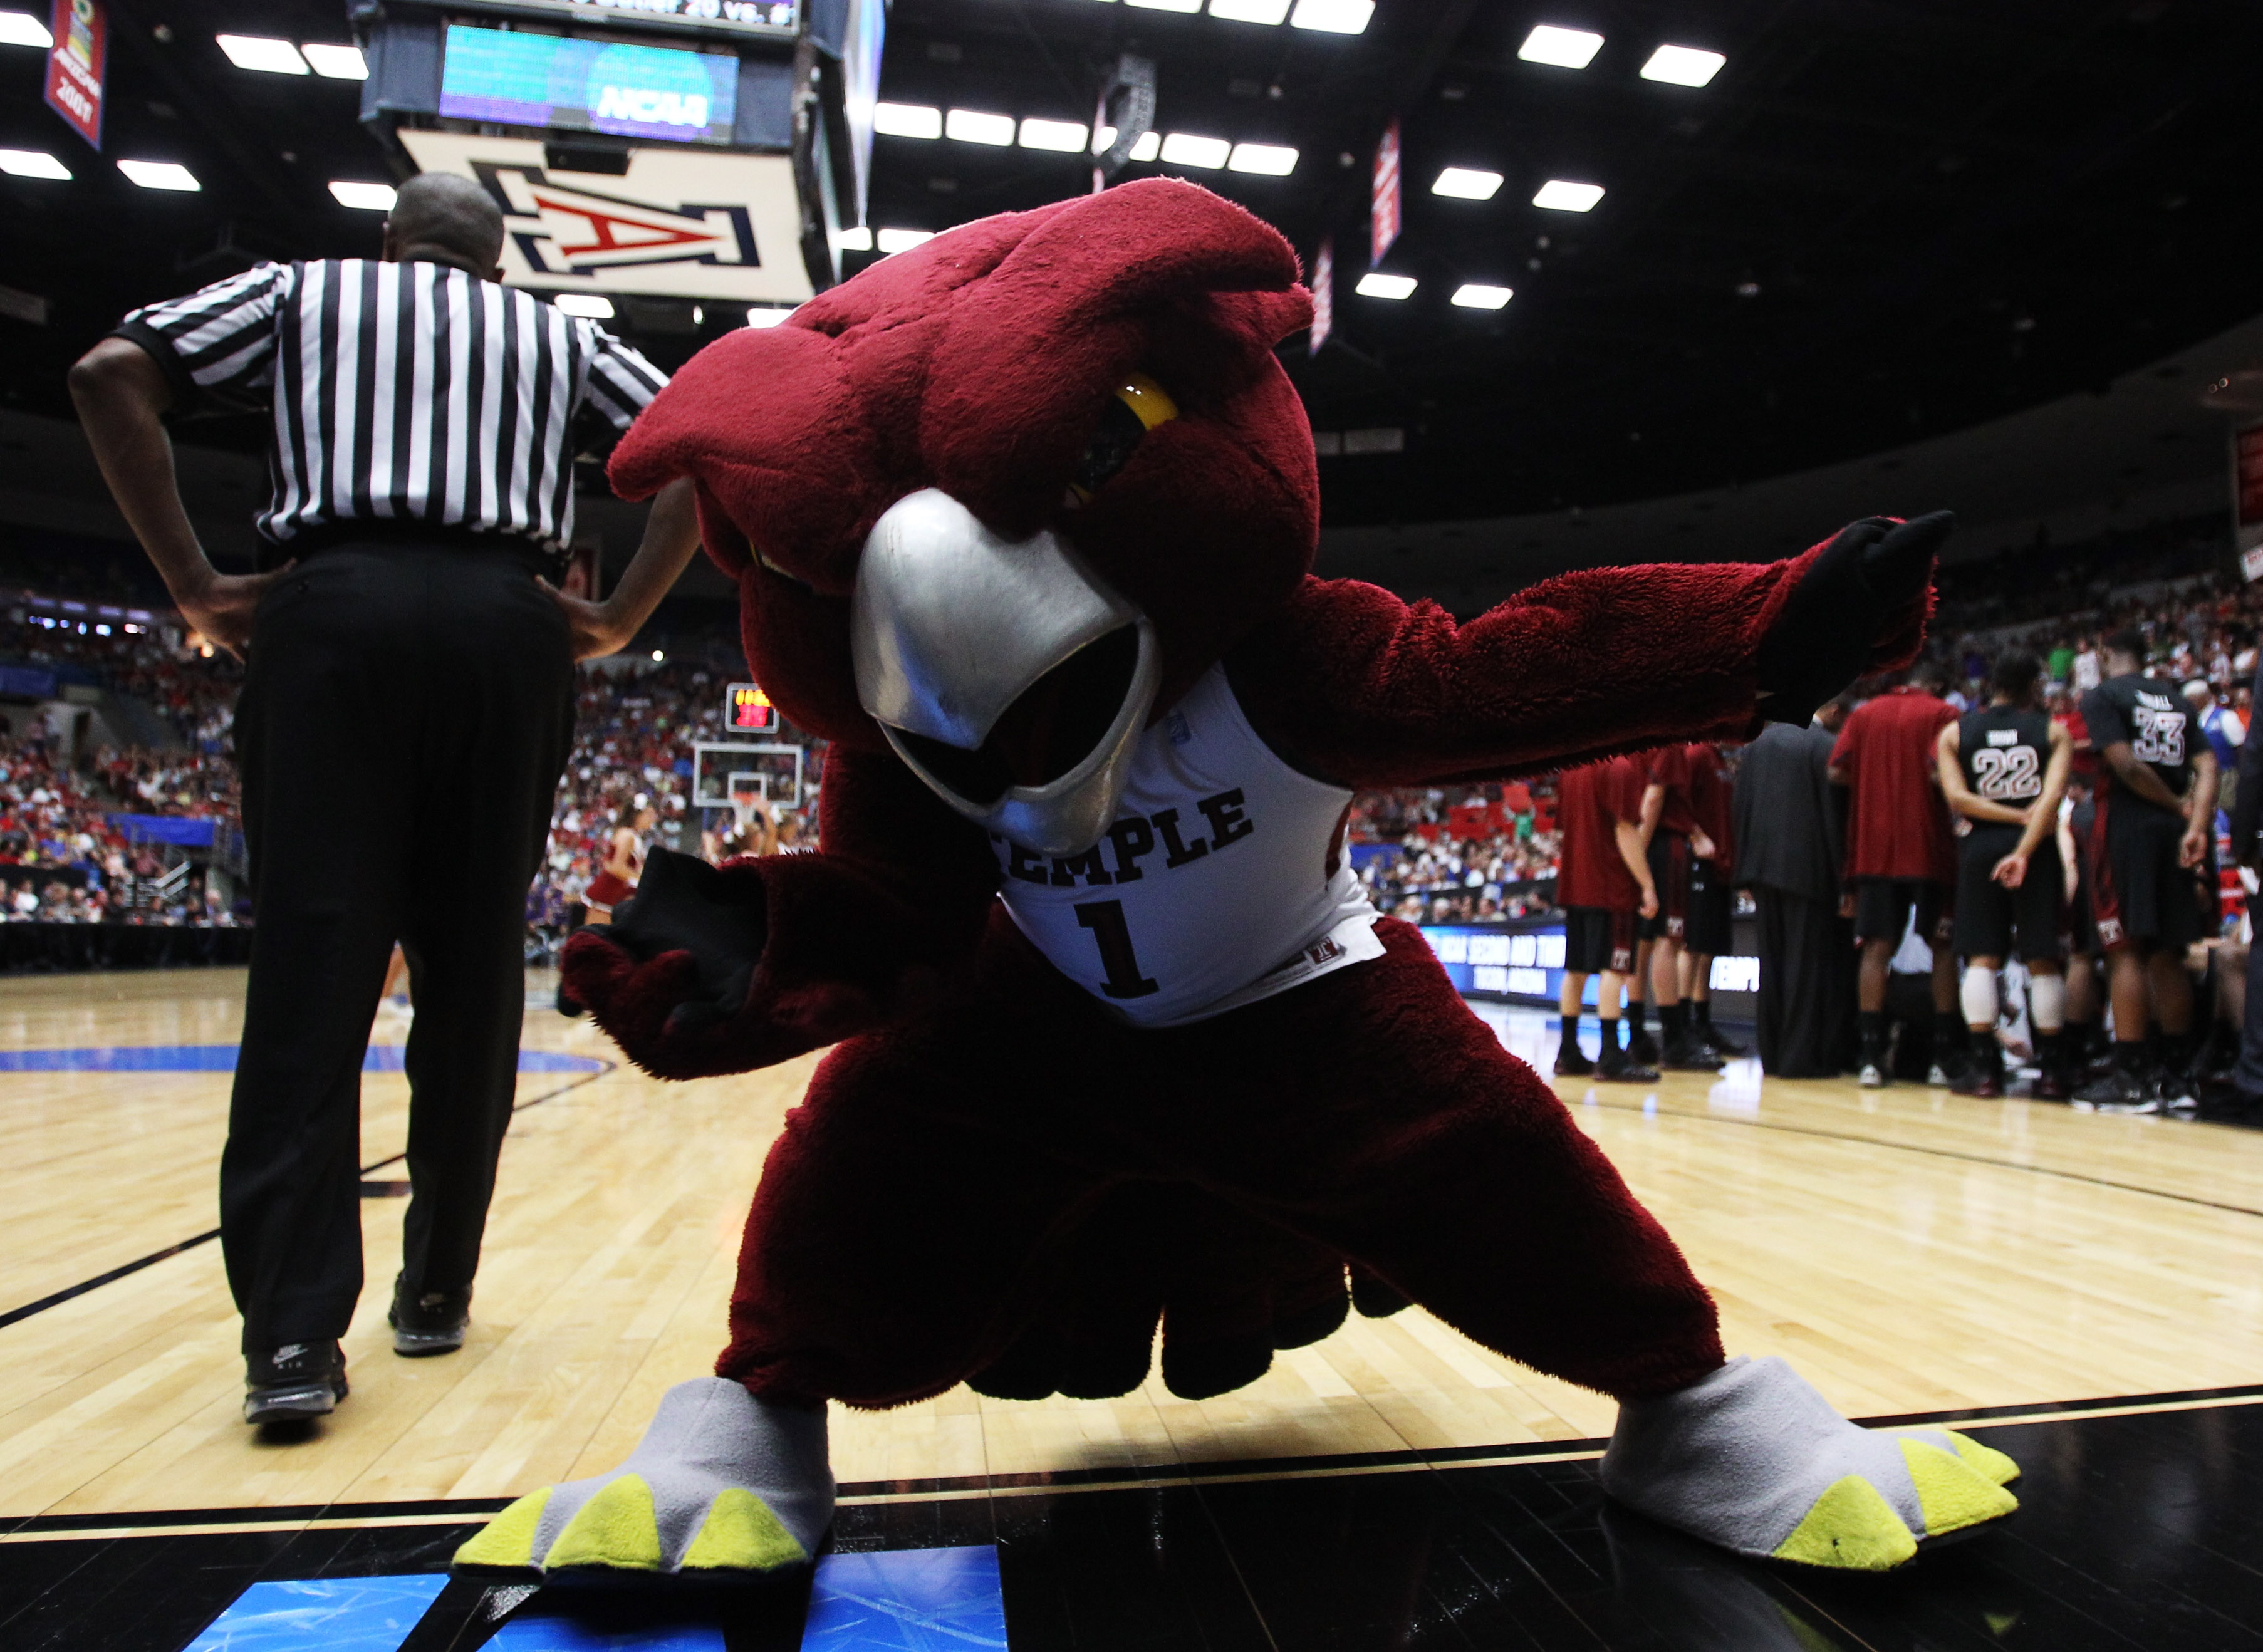 TUCSON, AZ - MARCH 19:  The Temple Owls mascot entertains the crowd during their game against the San Diego State Aztecs during the third round of the 2011 NCAA men's basketball tournament at McKale Center on March 19, 2011 in Tucson, Arizona.  (Photo by